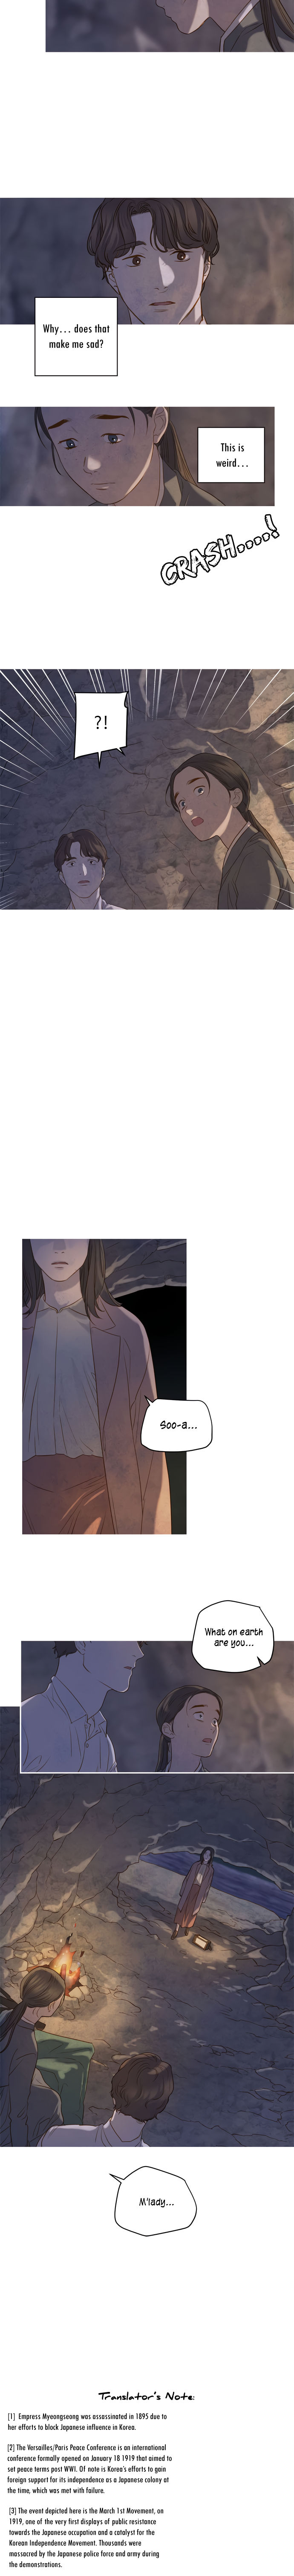 Gorae Byul – The Gyeongseong Mermaid Chapter 4 - Page 13